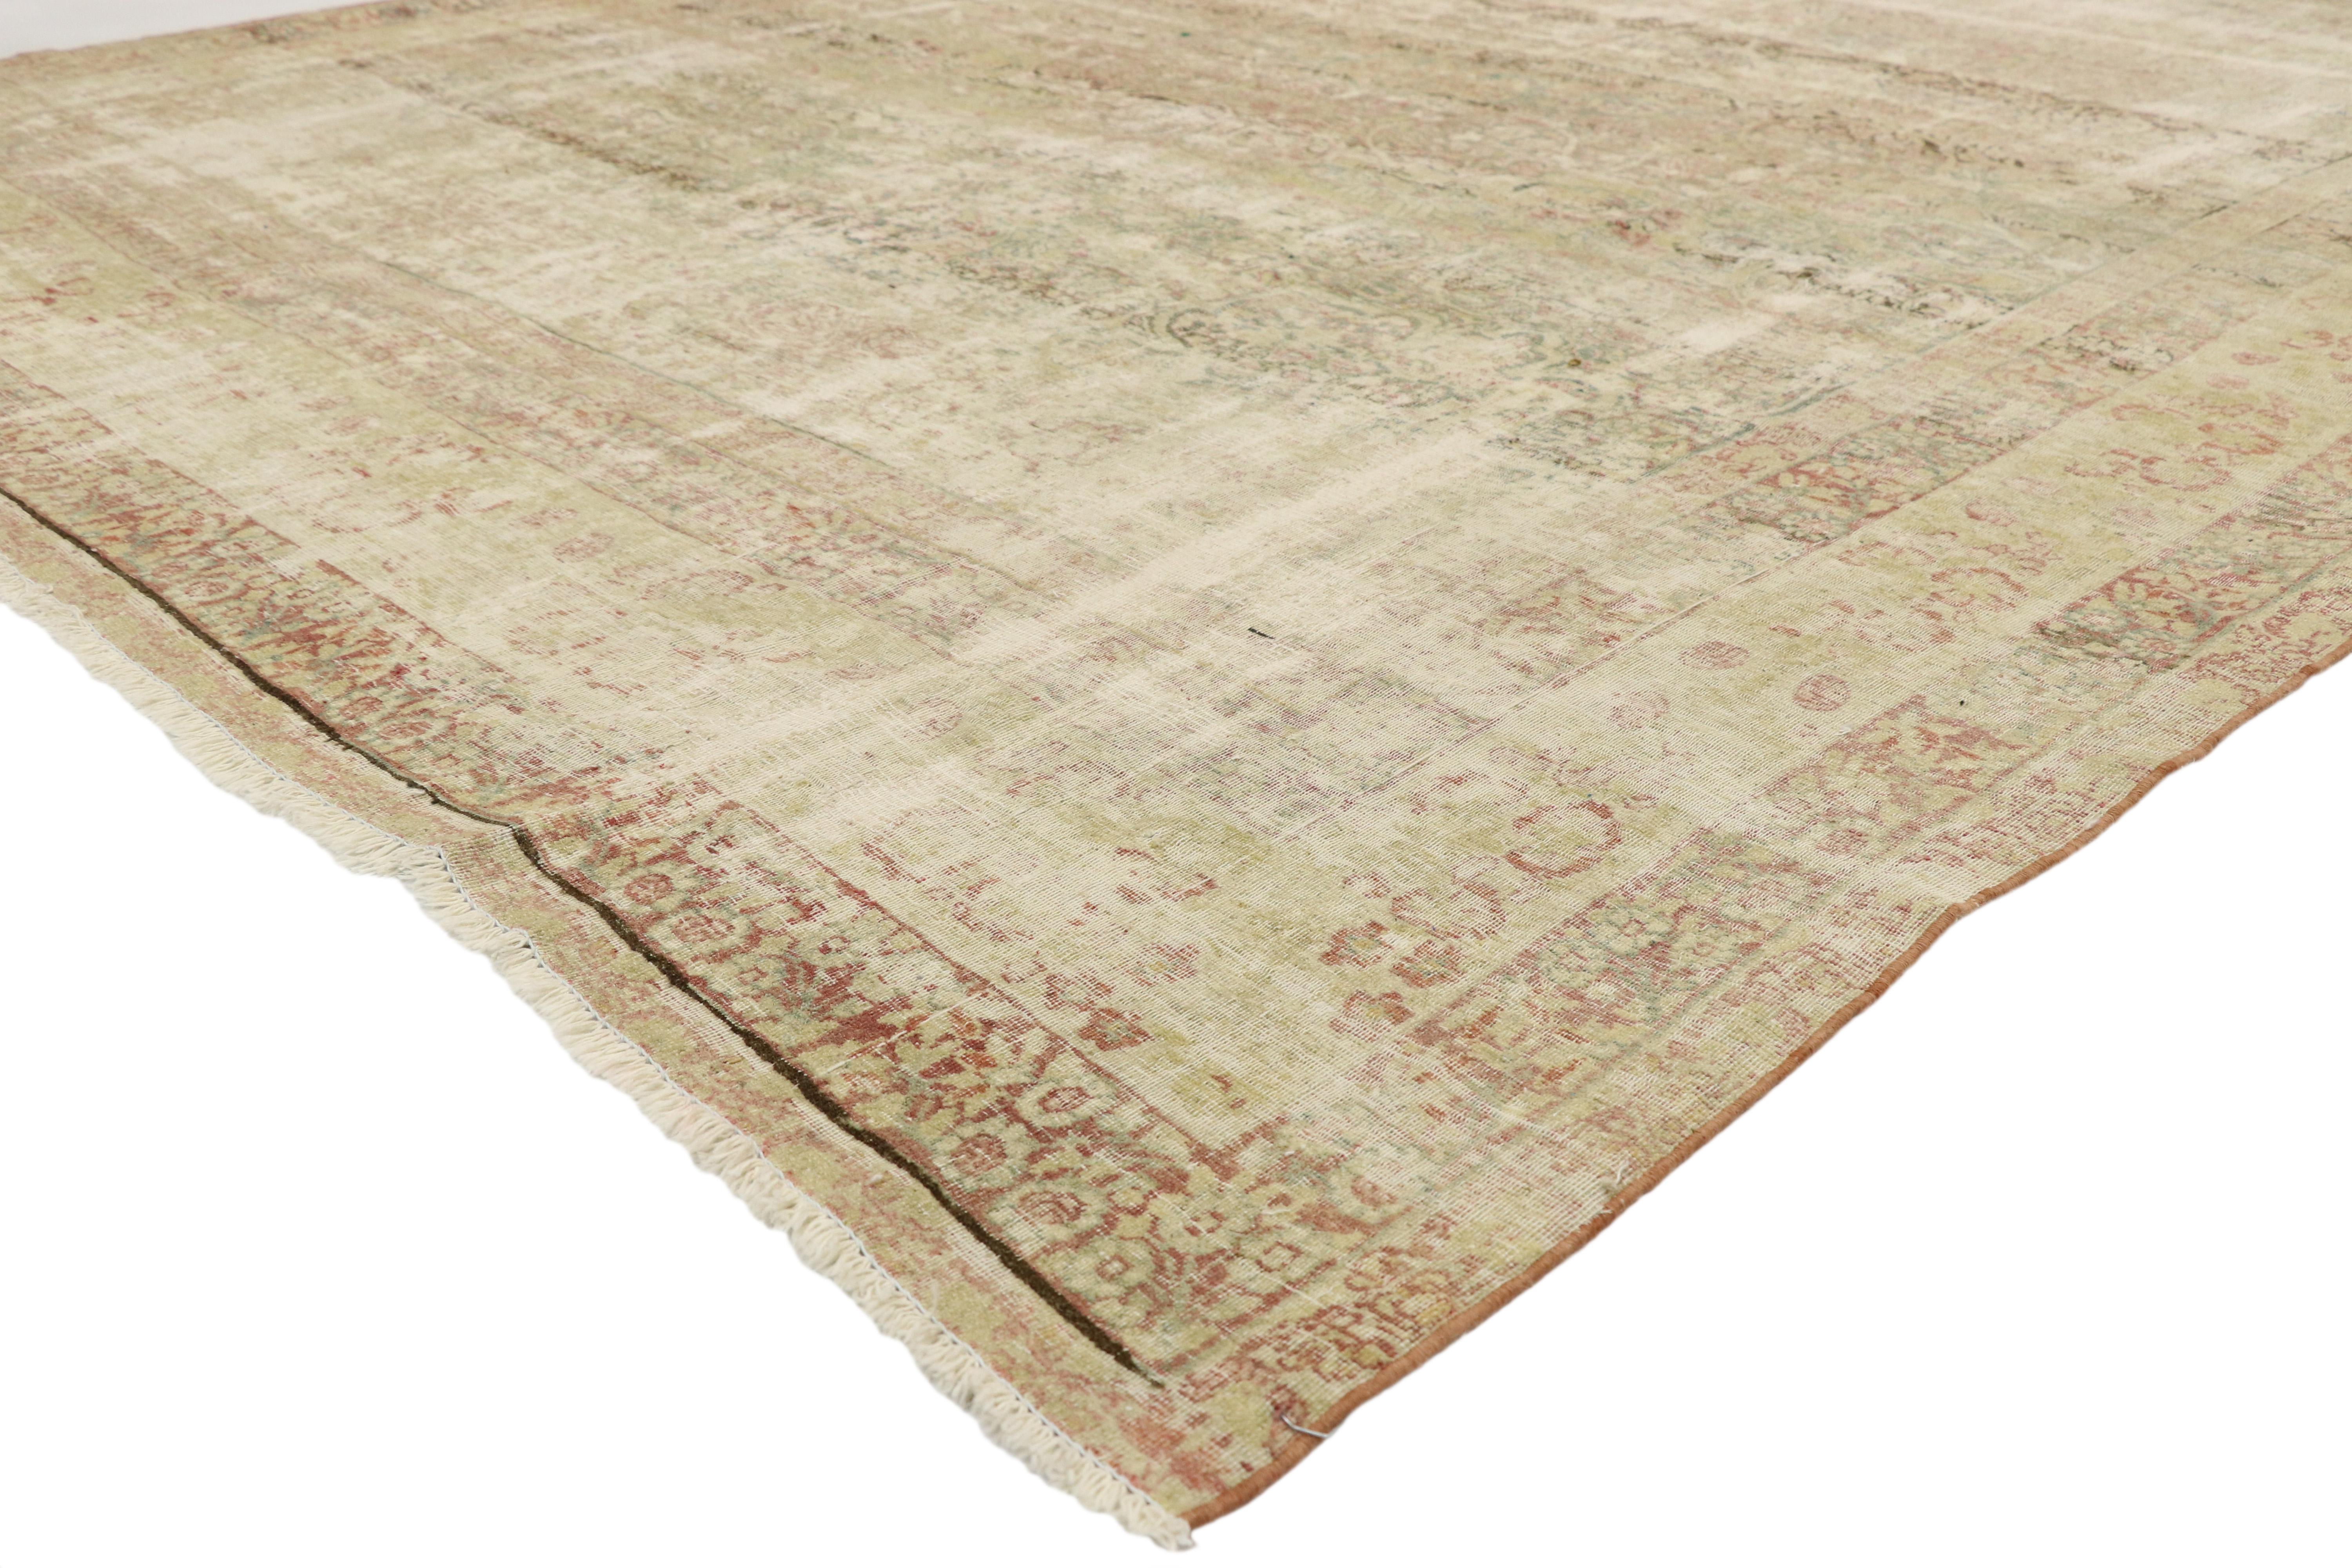 74907 Distressed Vintage Persian Kerman Rug, 08'01 x 12'06. Antique washed distressed Persian Kerman rugs are a specialized type of Persian rug that undergo intentional distressing techniques and washing processes to achieve a vintage appearance.